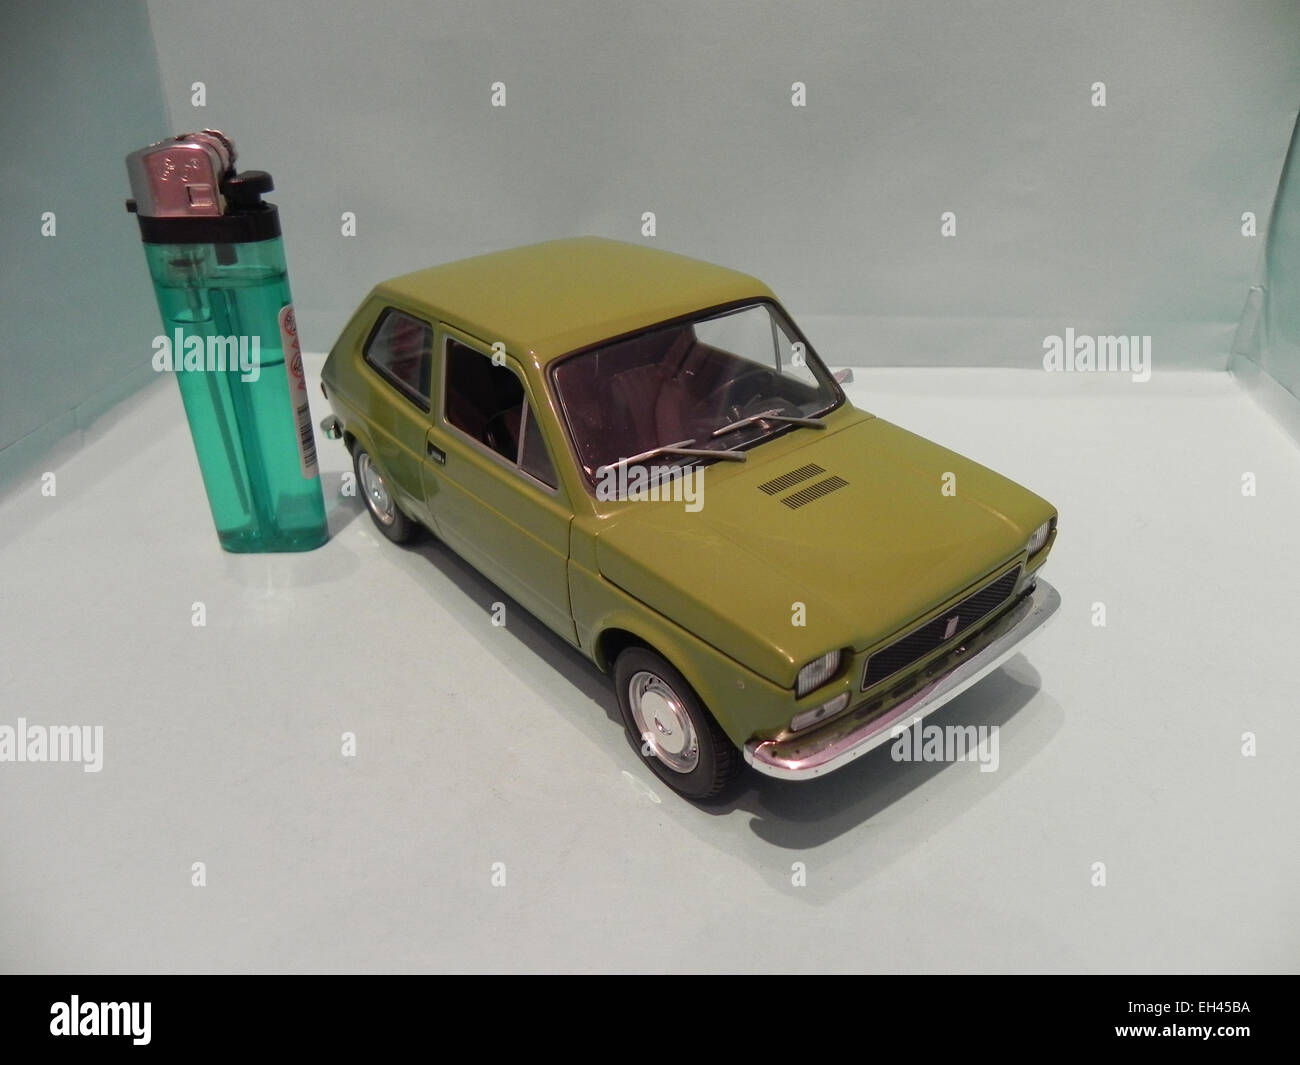 My miniature of an old Fiat 127, an example of Italian design Stock Photo